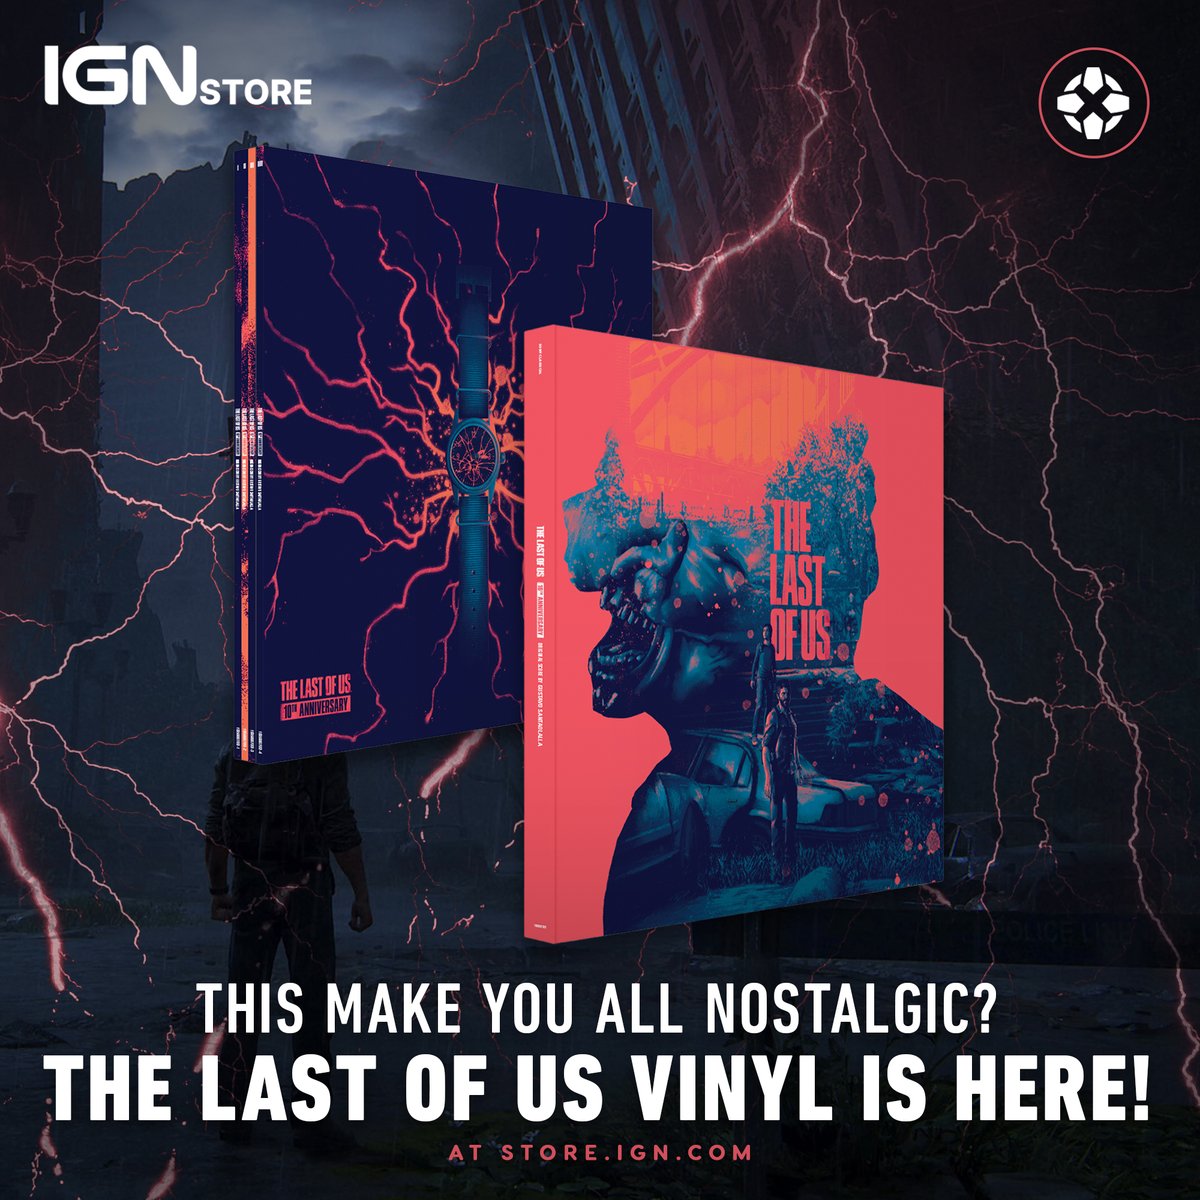 Celebrate a decade of the game and its music with the release of The Last of Us 10th Anniversary Vinyl Box Set. The box set contains music from the original The Last of Us and The Last of Us Volume 2 albums, including the famous main theme. store.ign.com/pages/limited-…